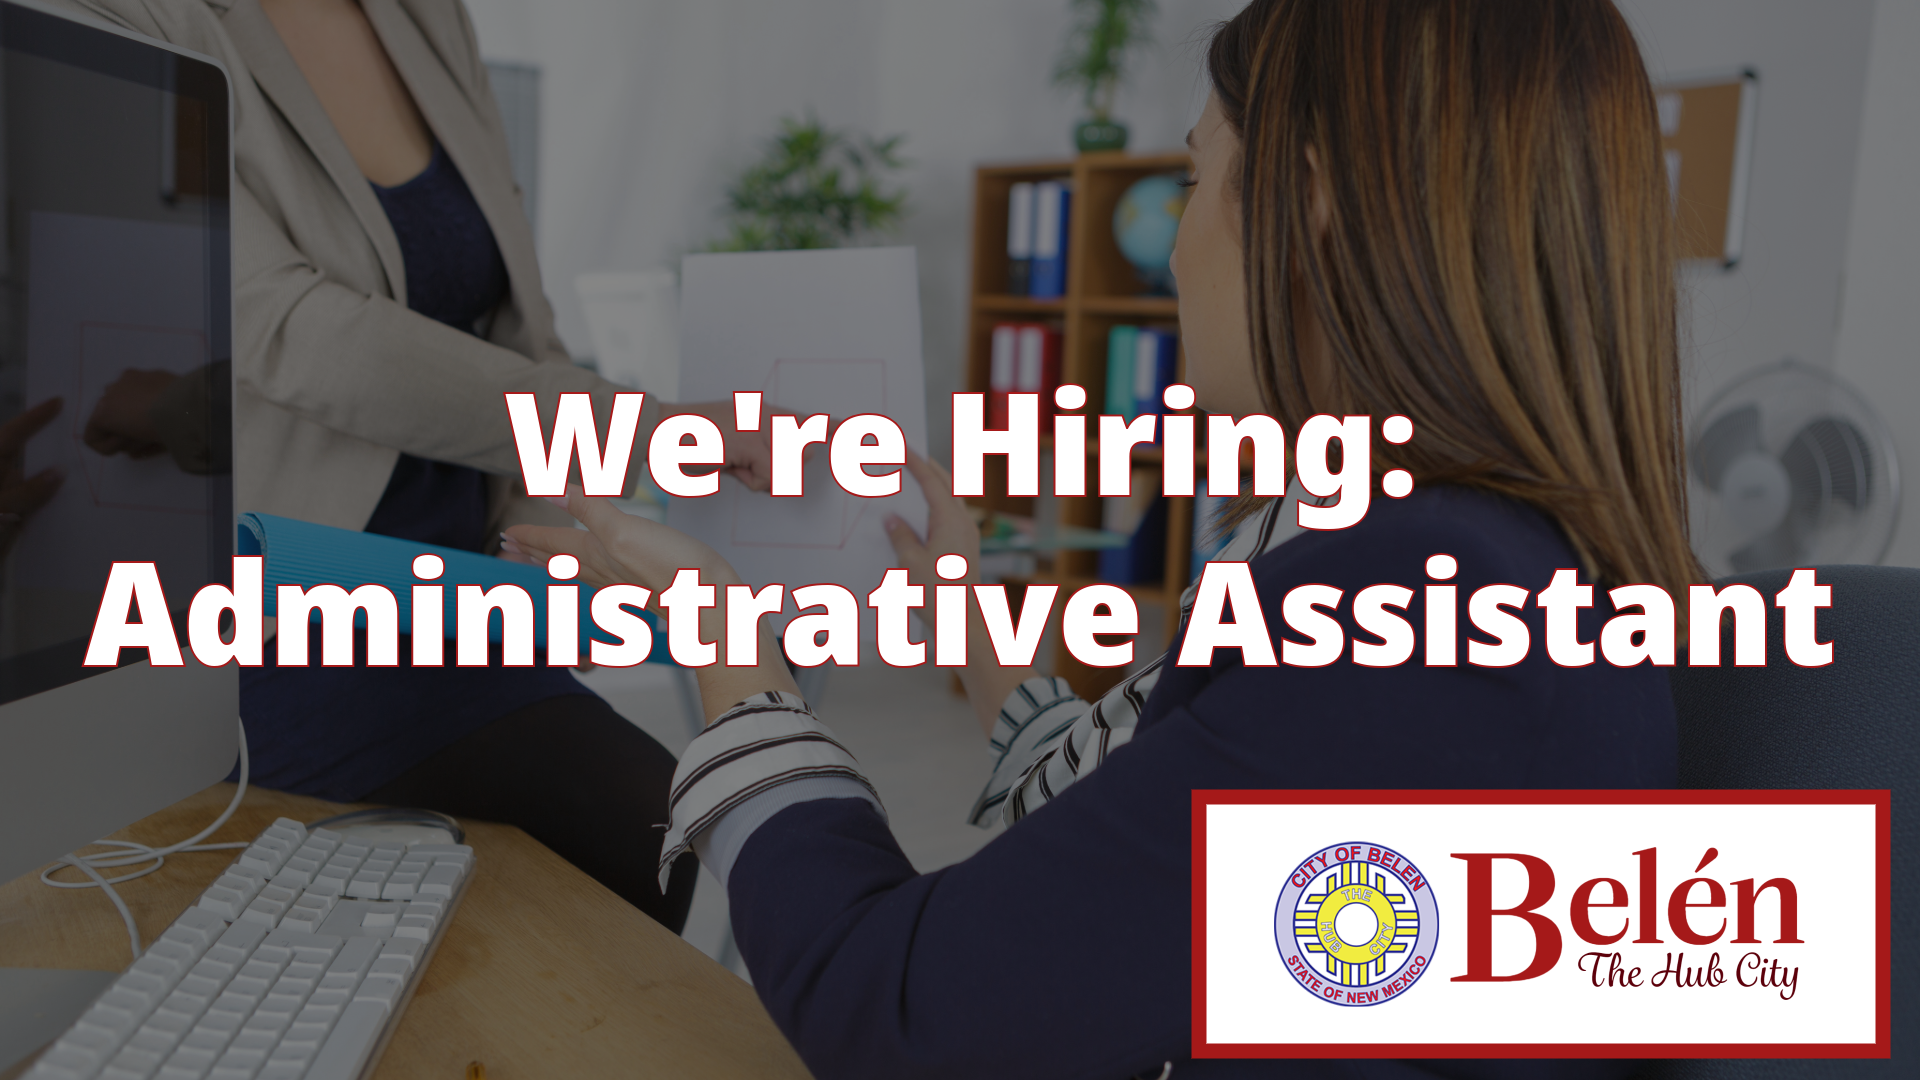 Featured image for “We’re Hiring: Administrative Assistant”